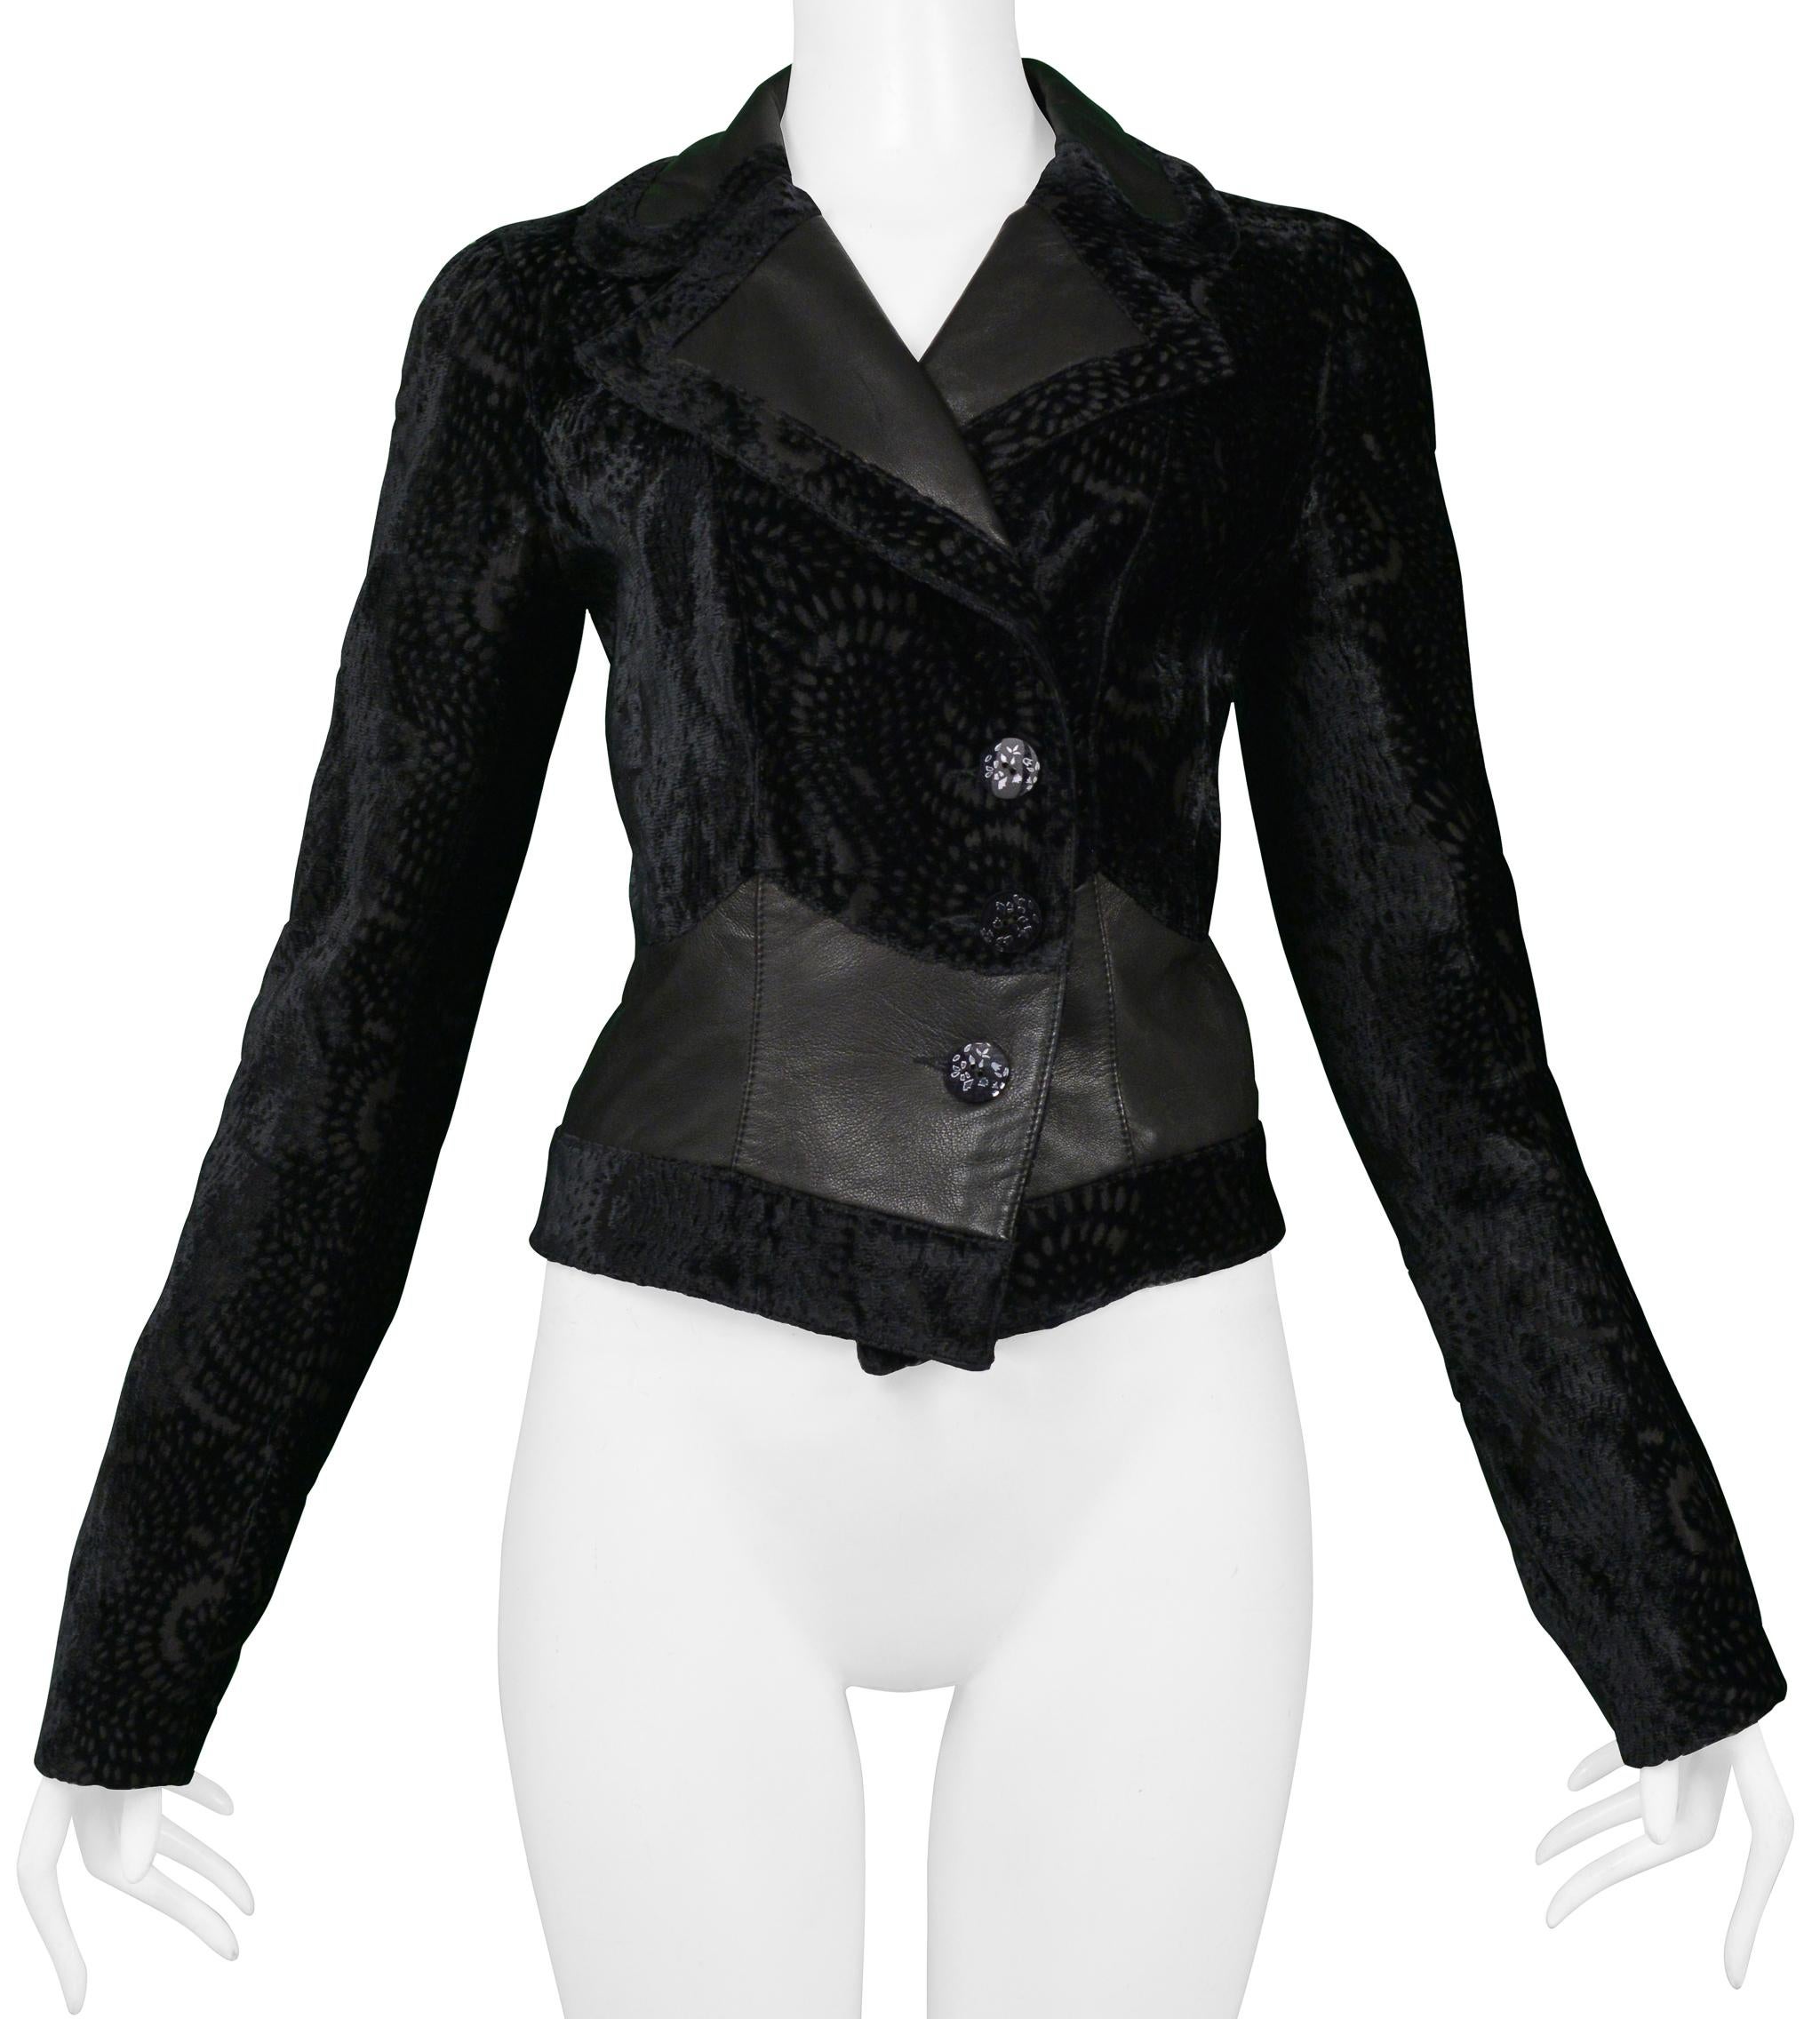 Resurrection Vintage is excited to offer a vintage John Galliano black silk velvet jacket featuring a cut velvet pattern, leather lapels and insets, decorative buttons, and tailored body and three button center front closure.

Companion jacket to